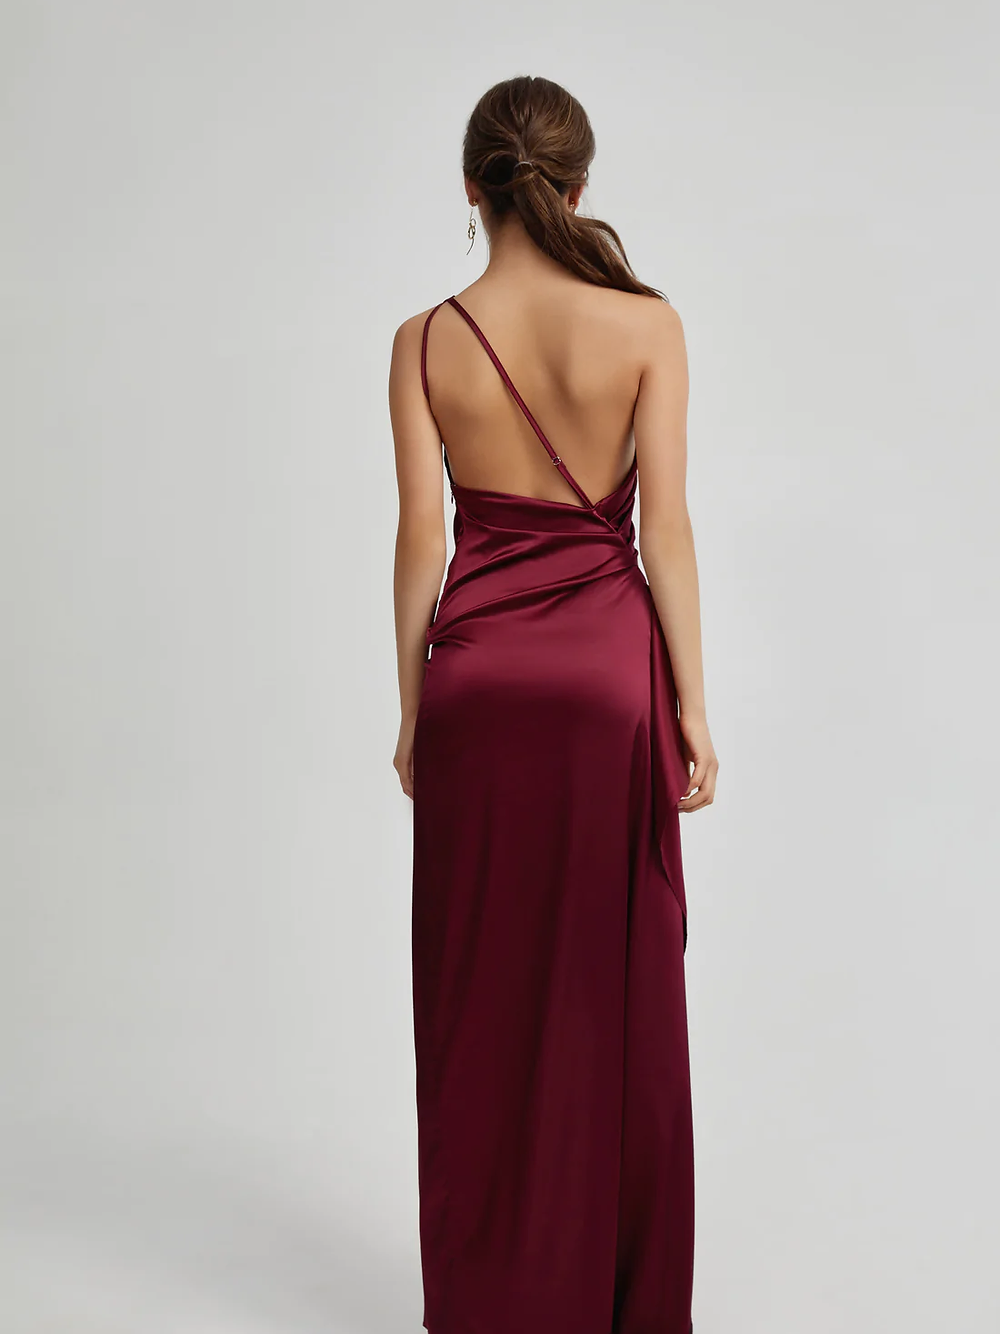 Lexy Red | Sparkly Cowl Neck Maxi Dress